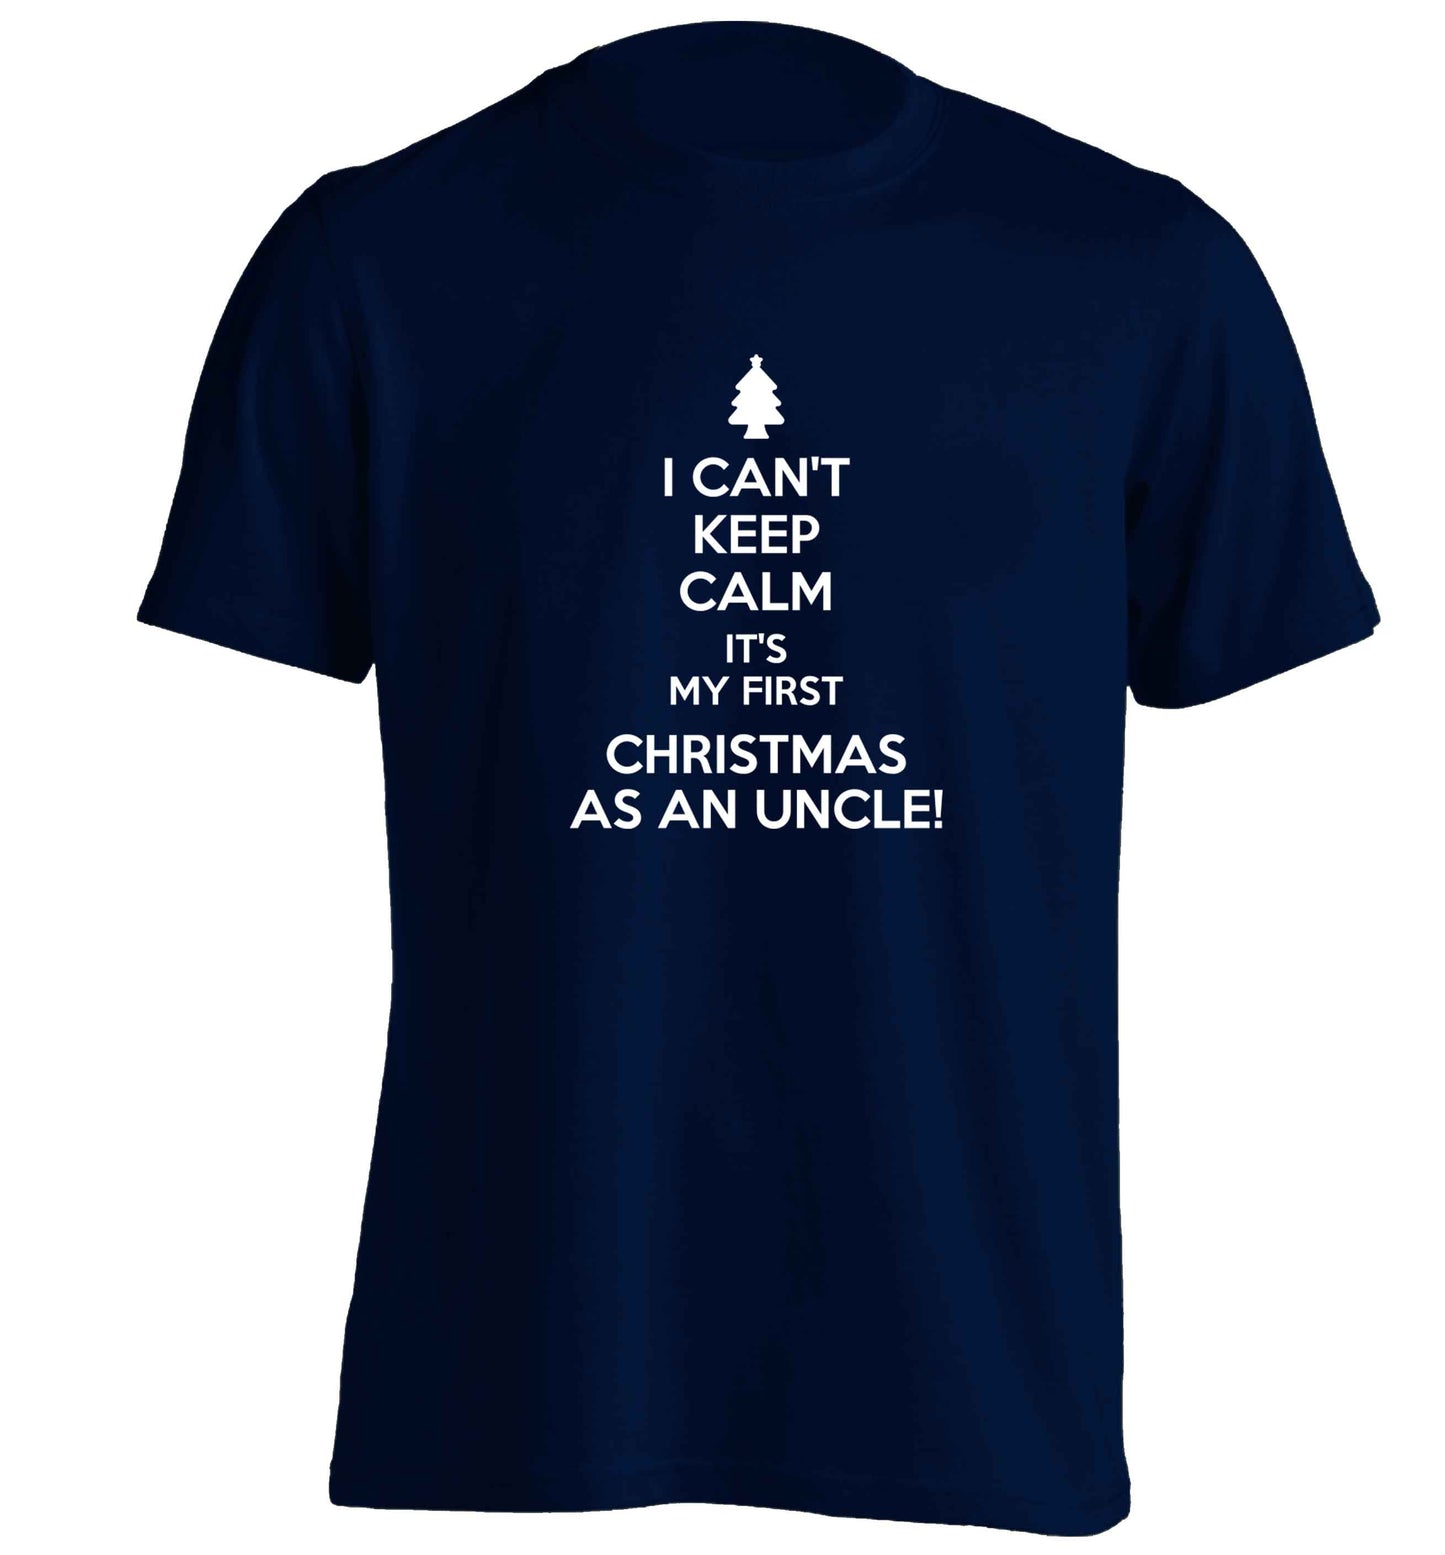 I can't keep calm it's my first Christmas as an uncle! adults unisex navy Tshirt 2XL